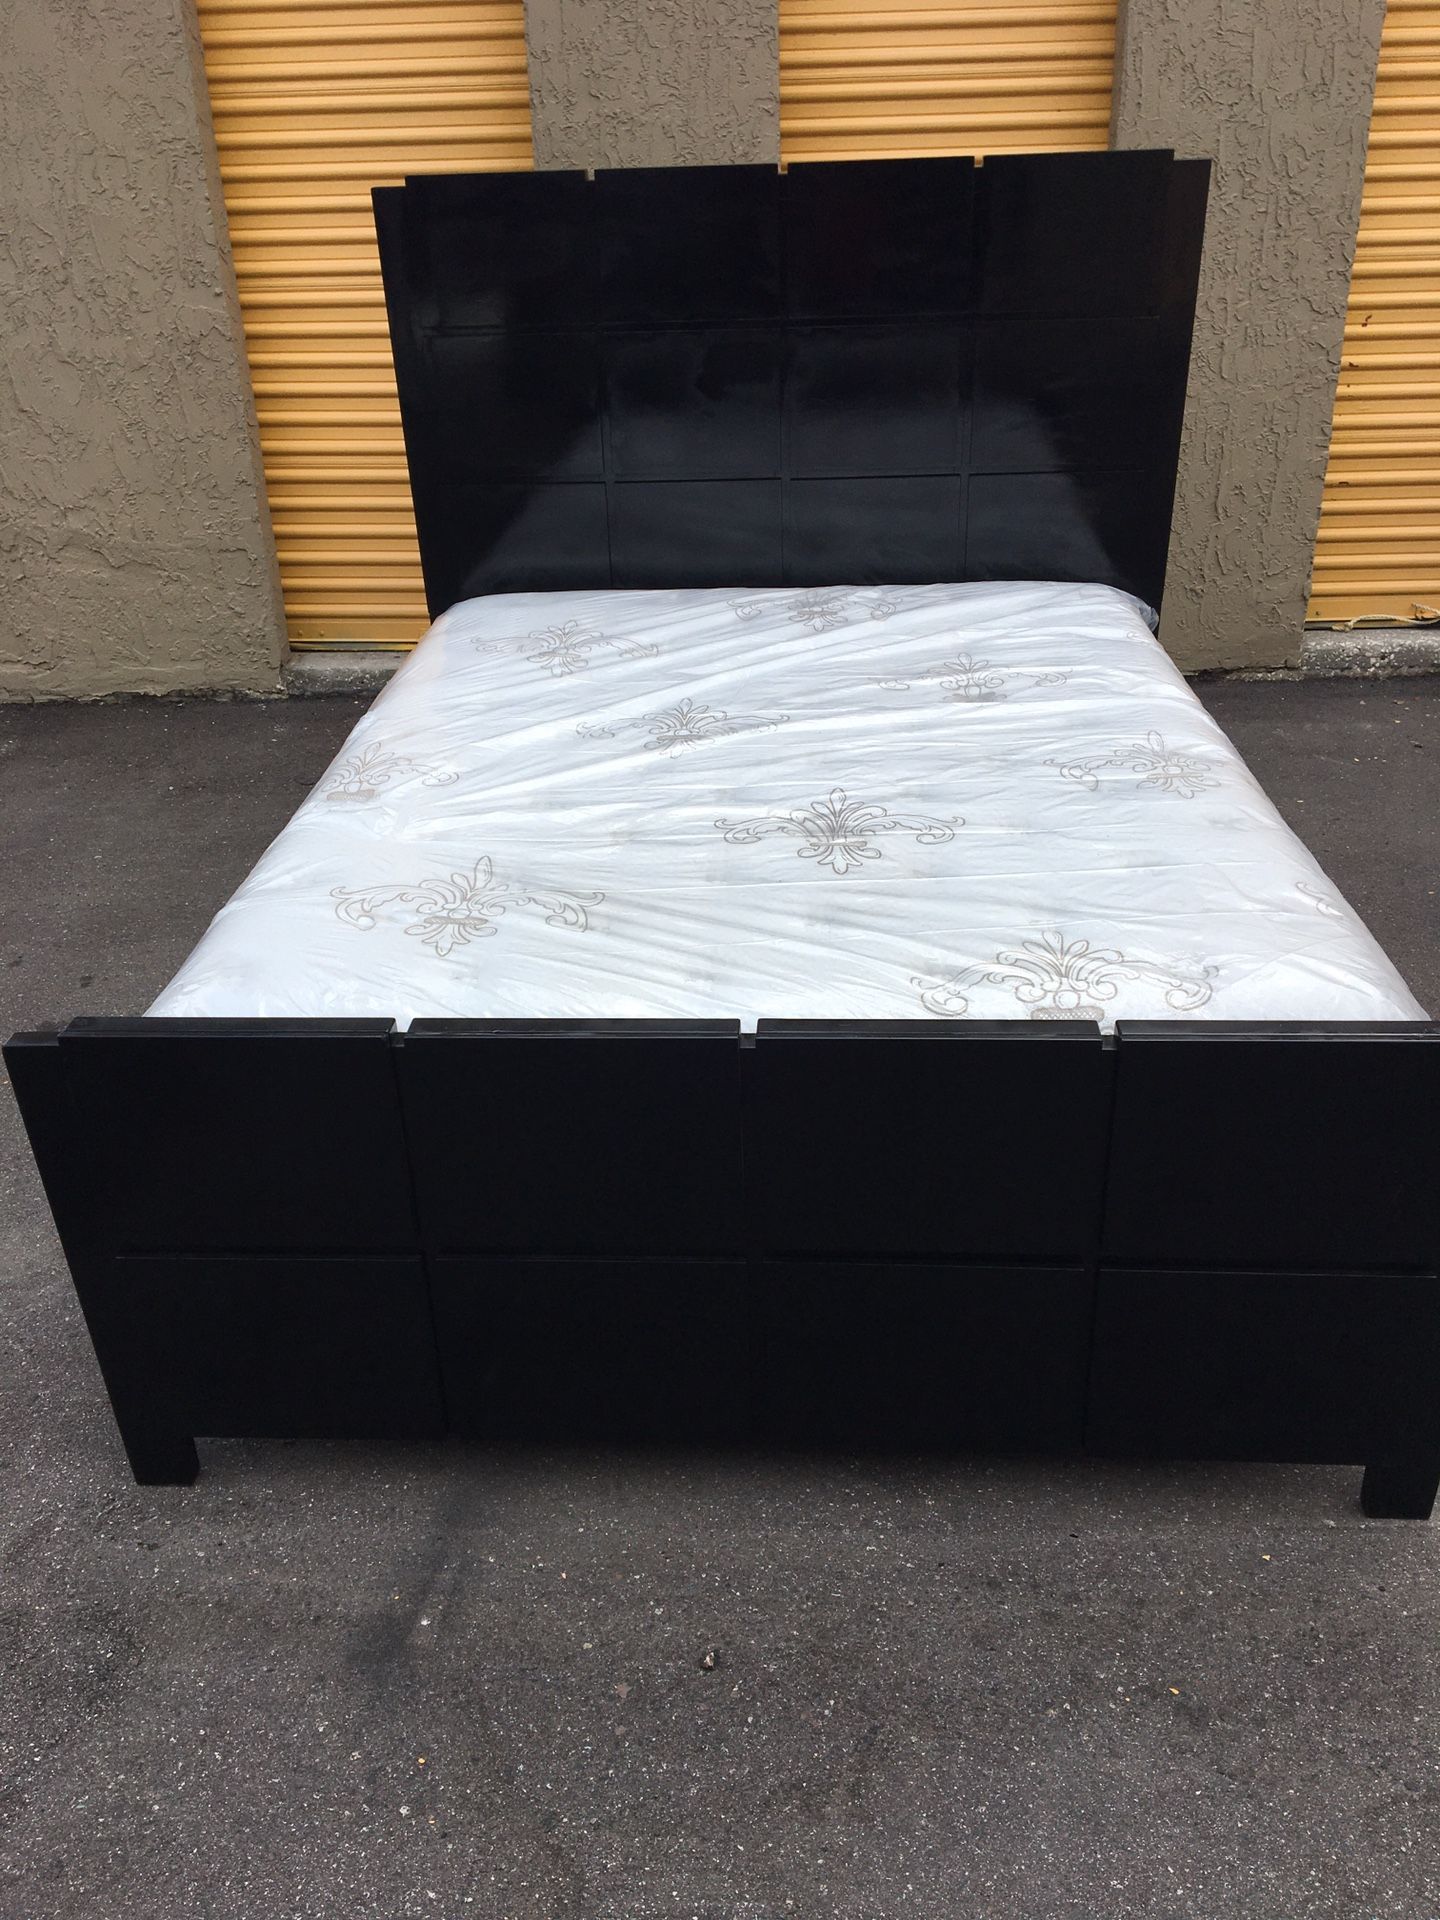 Black solid wood-bed frame with brand new Queen size pillows top mattress and box spring in plastics